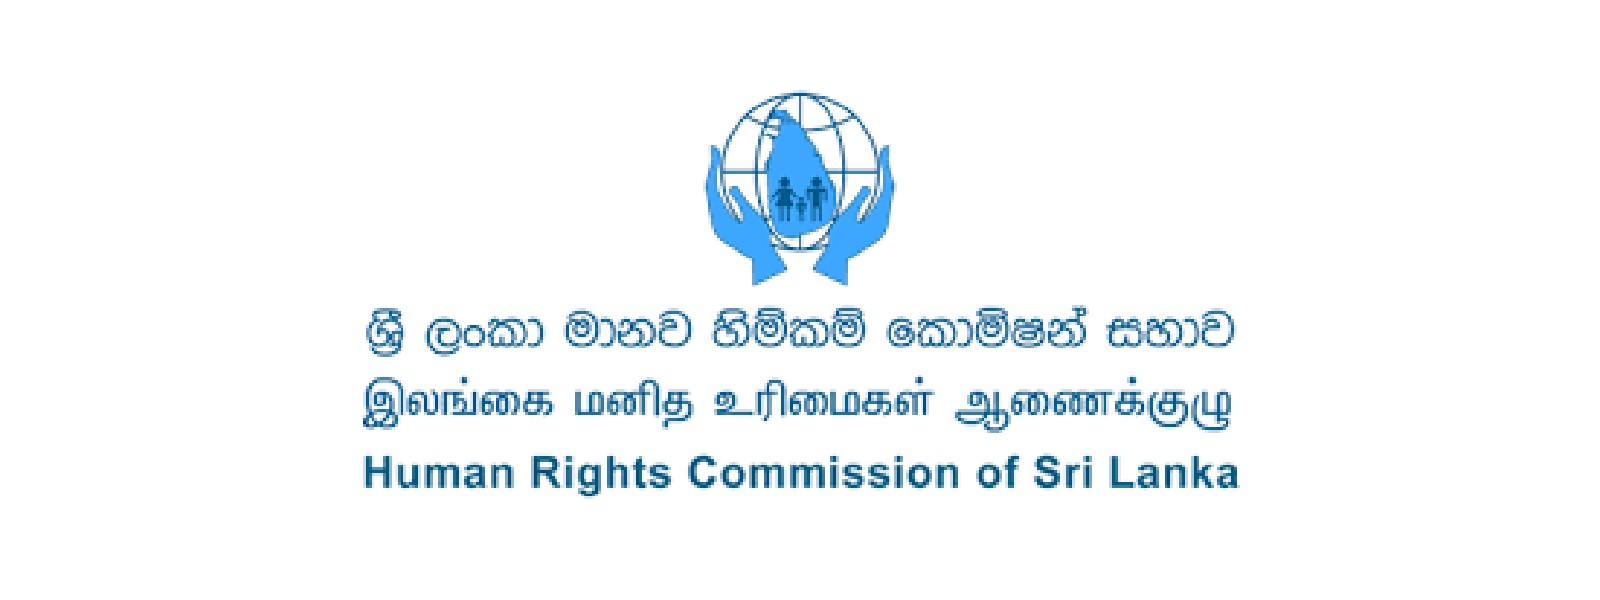 Government must explain reasons for declaring emergency – Human Rights Commission